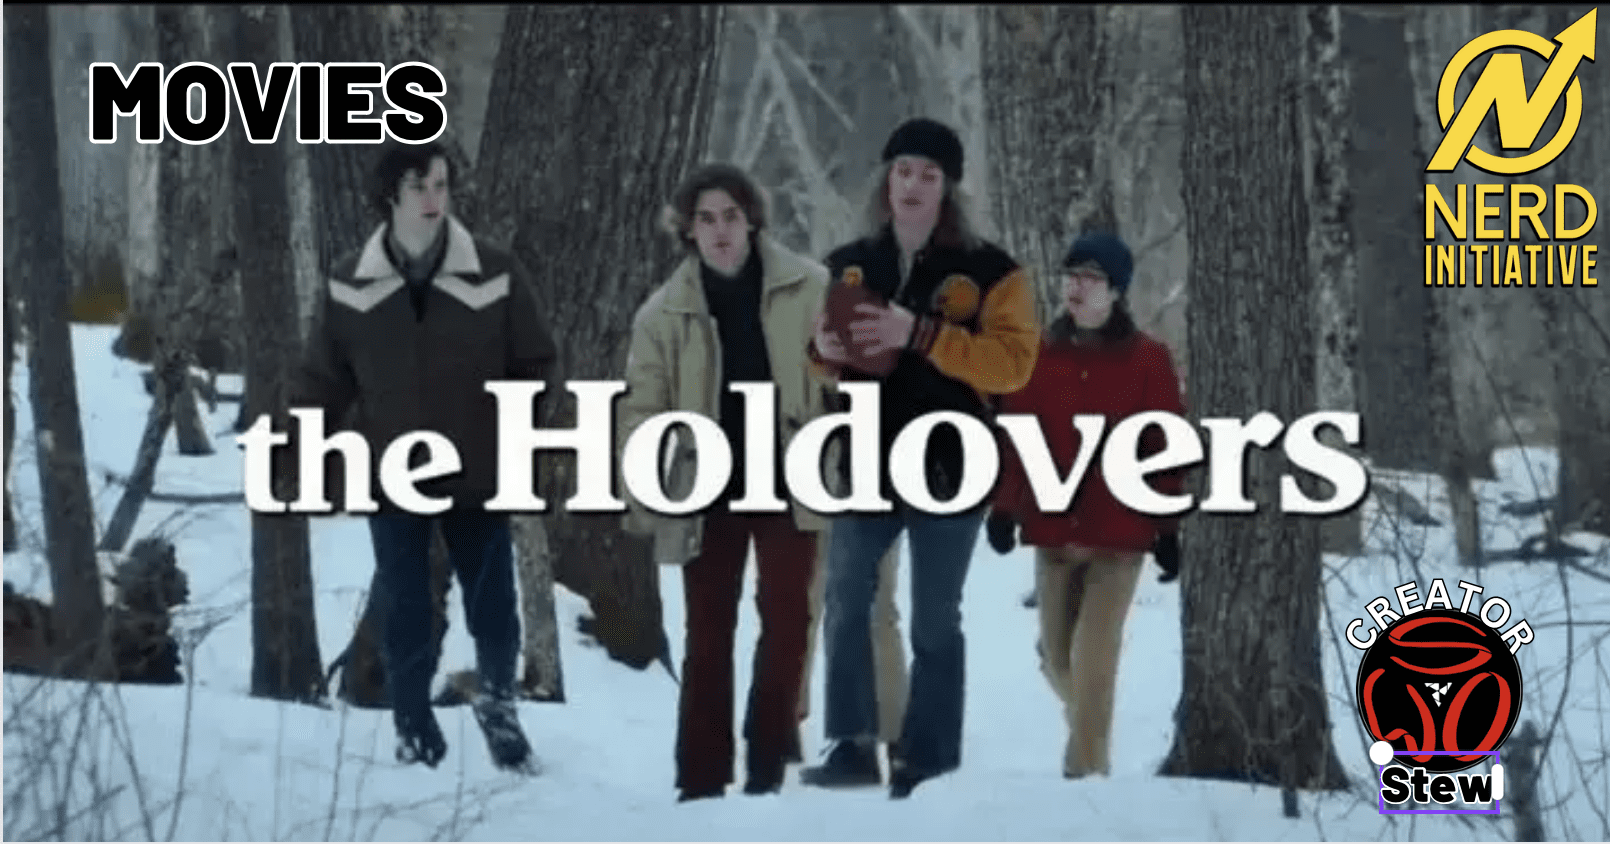 The Holdovers Review NERD INITIATIVE